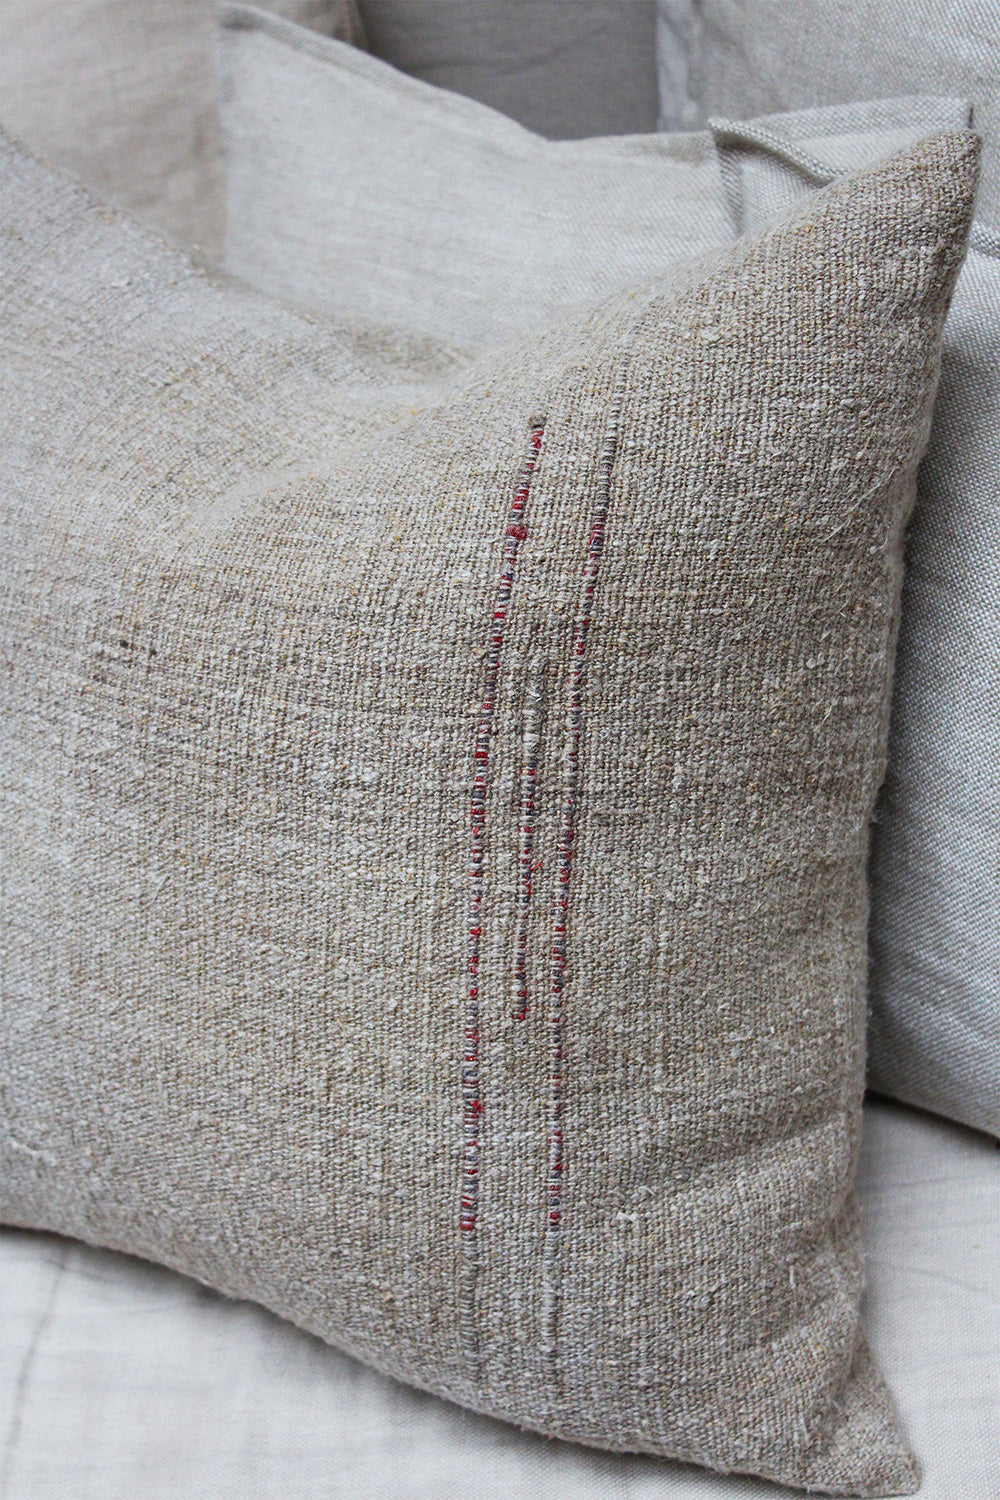 Close-up of the textures in the natural dyed linen cushions.